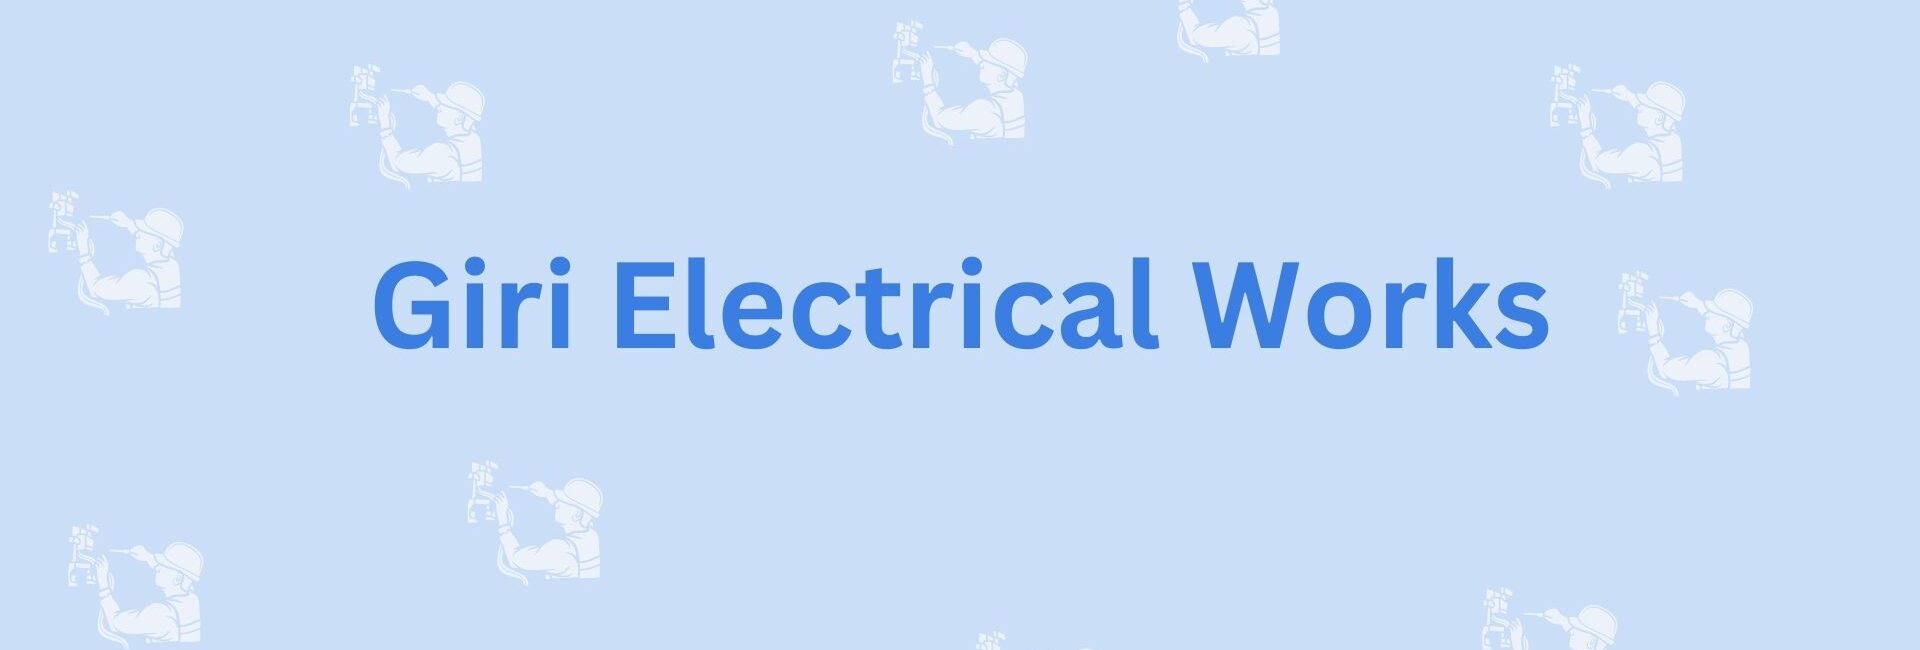 Giri Electrical Works- Noida's Electrician Service Provider